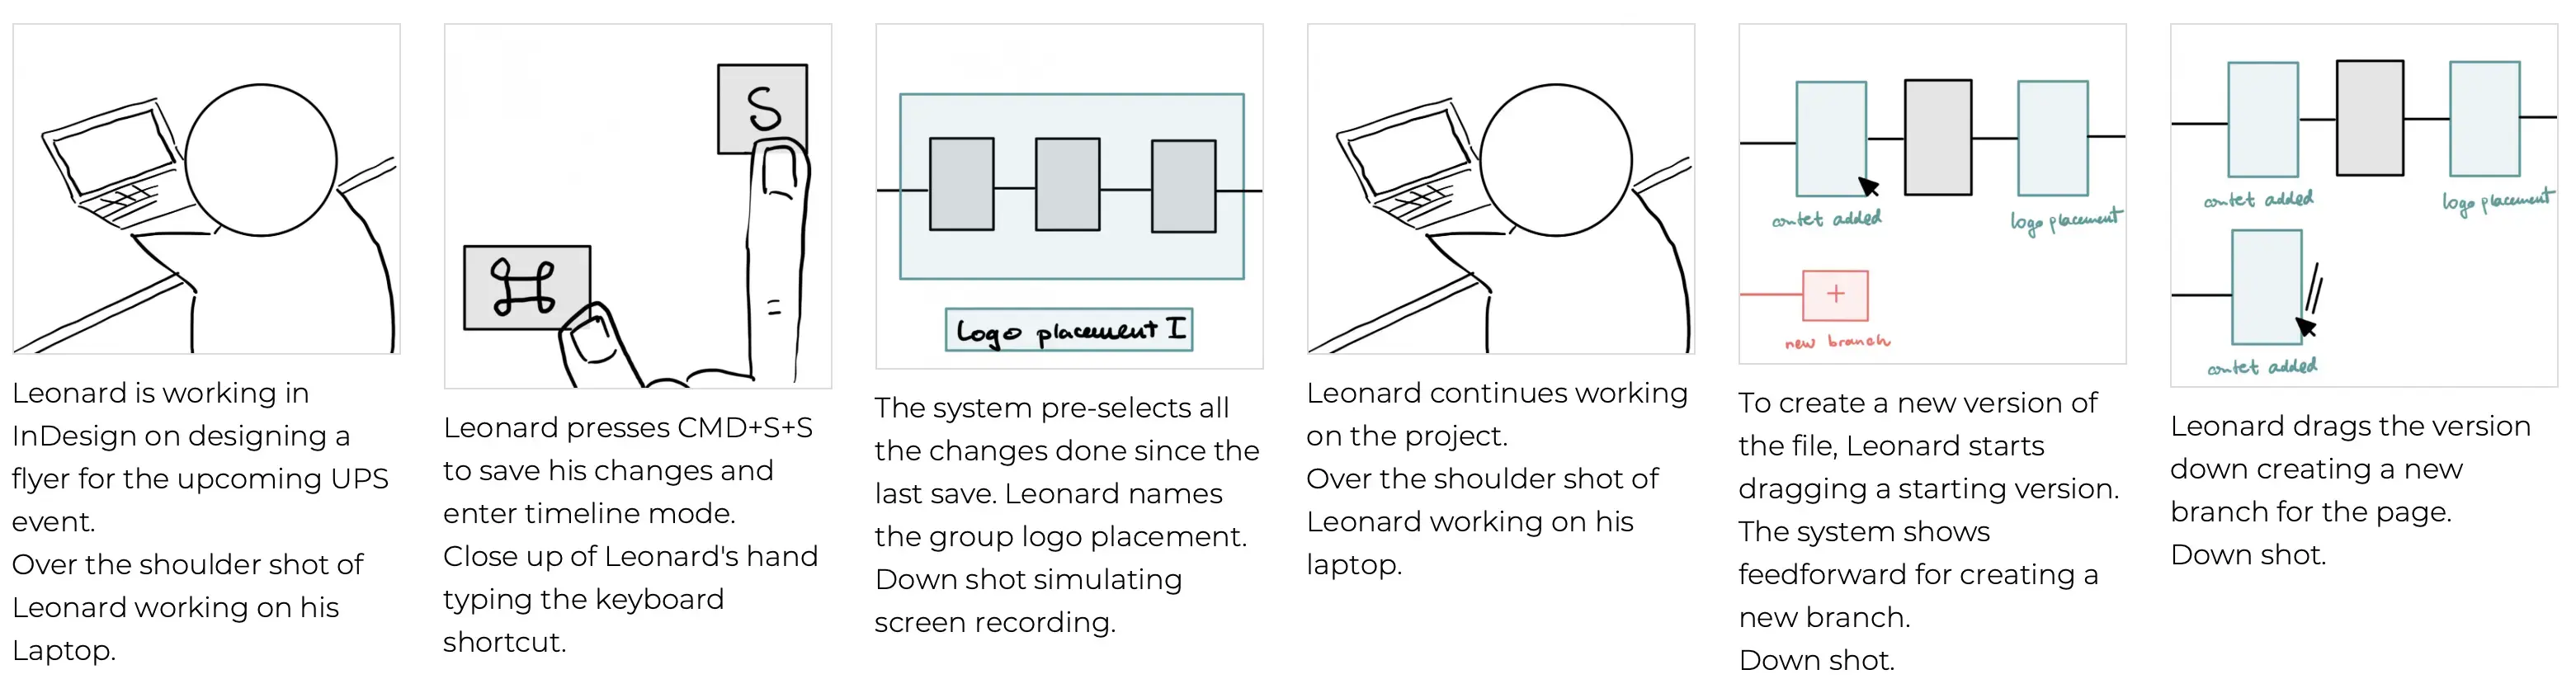 Parts of the storyboard